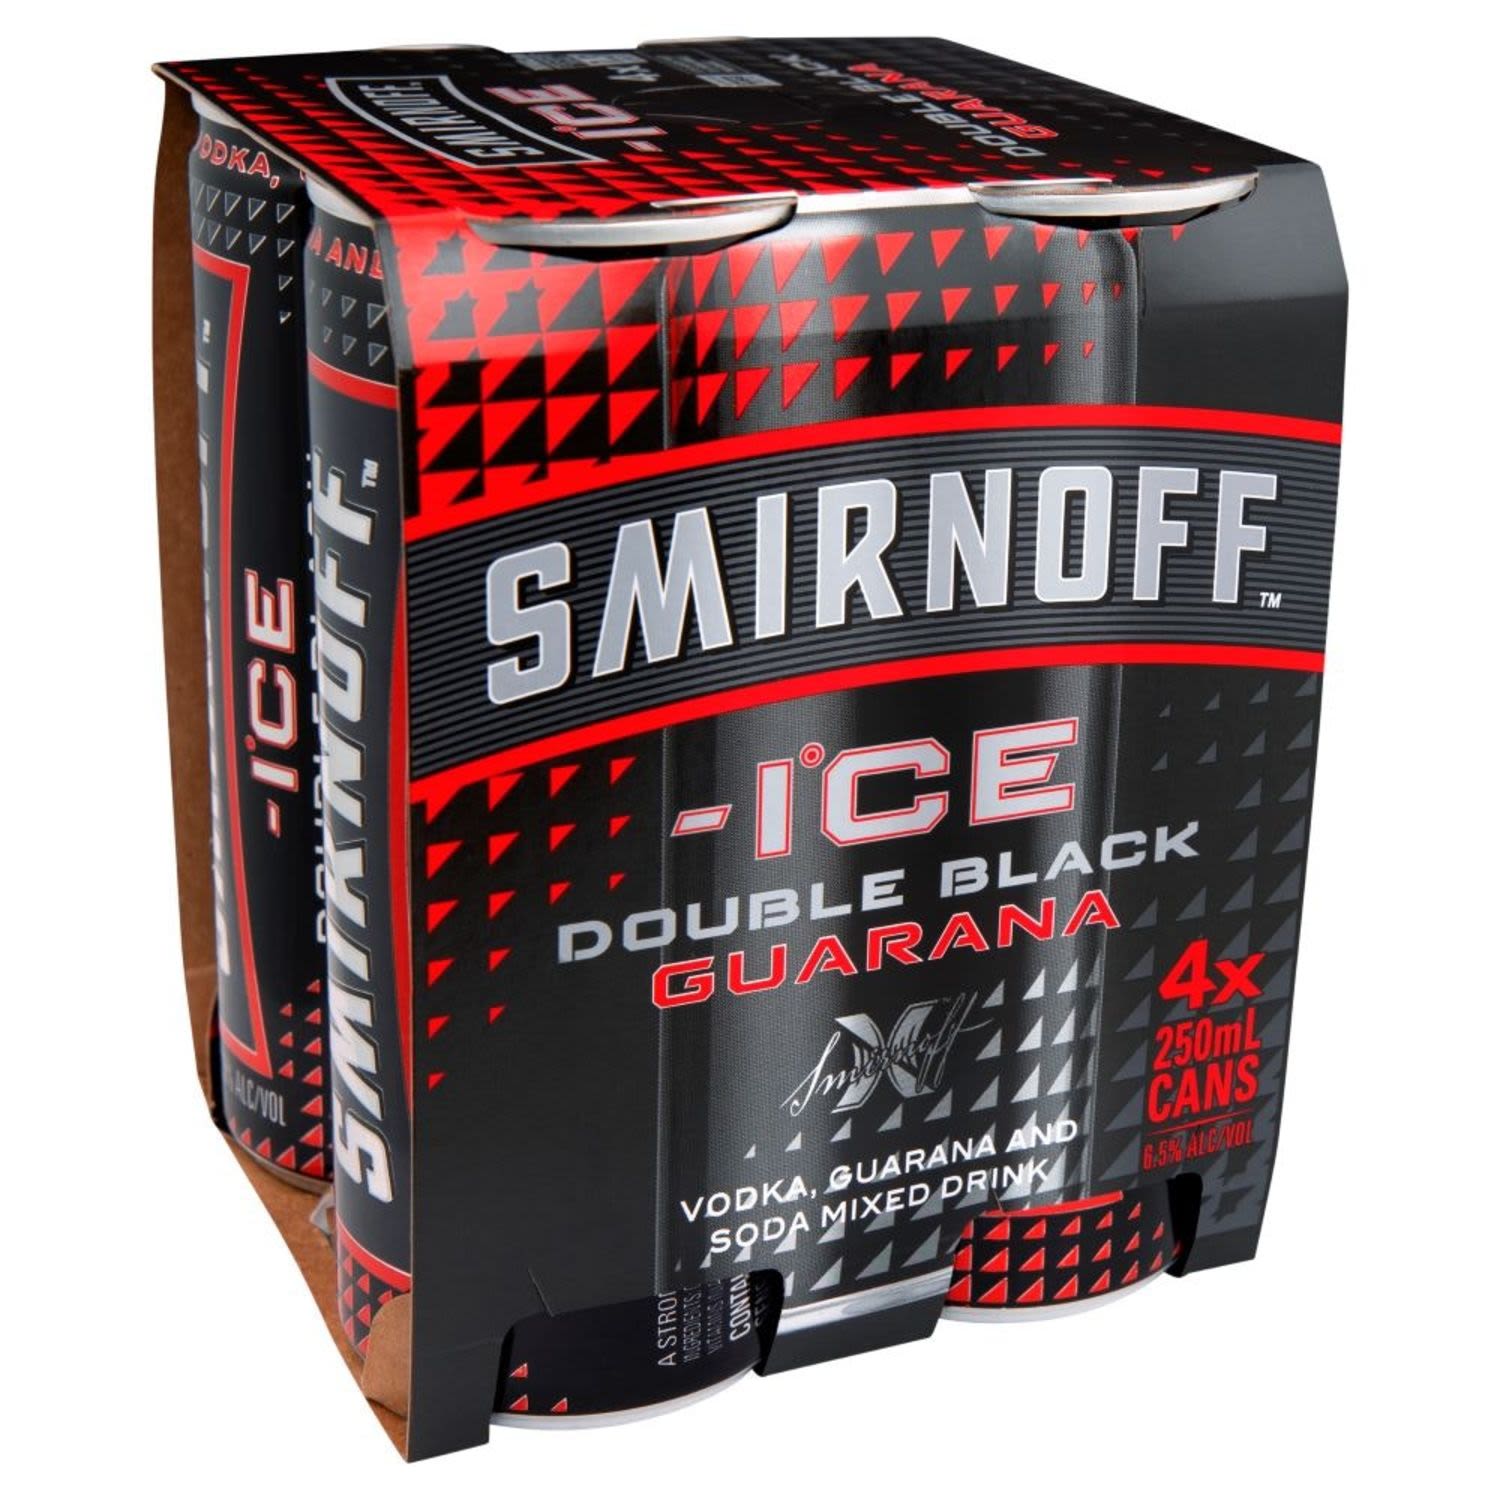 Smirnoff Ice Double Black and Guarana Cans 250mL<br /> <br />Alcohol Volume: 6.50%<br /><br />Pack Format: 4 Pack<br /><br />Standard Drinks: 1.3</br /><br />Pack Type: Can<br />